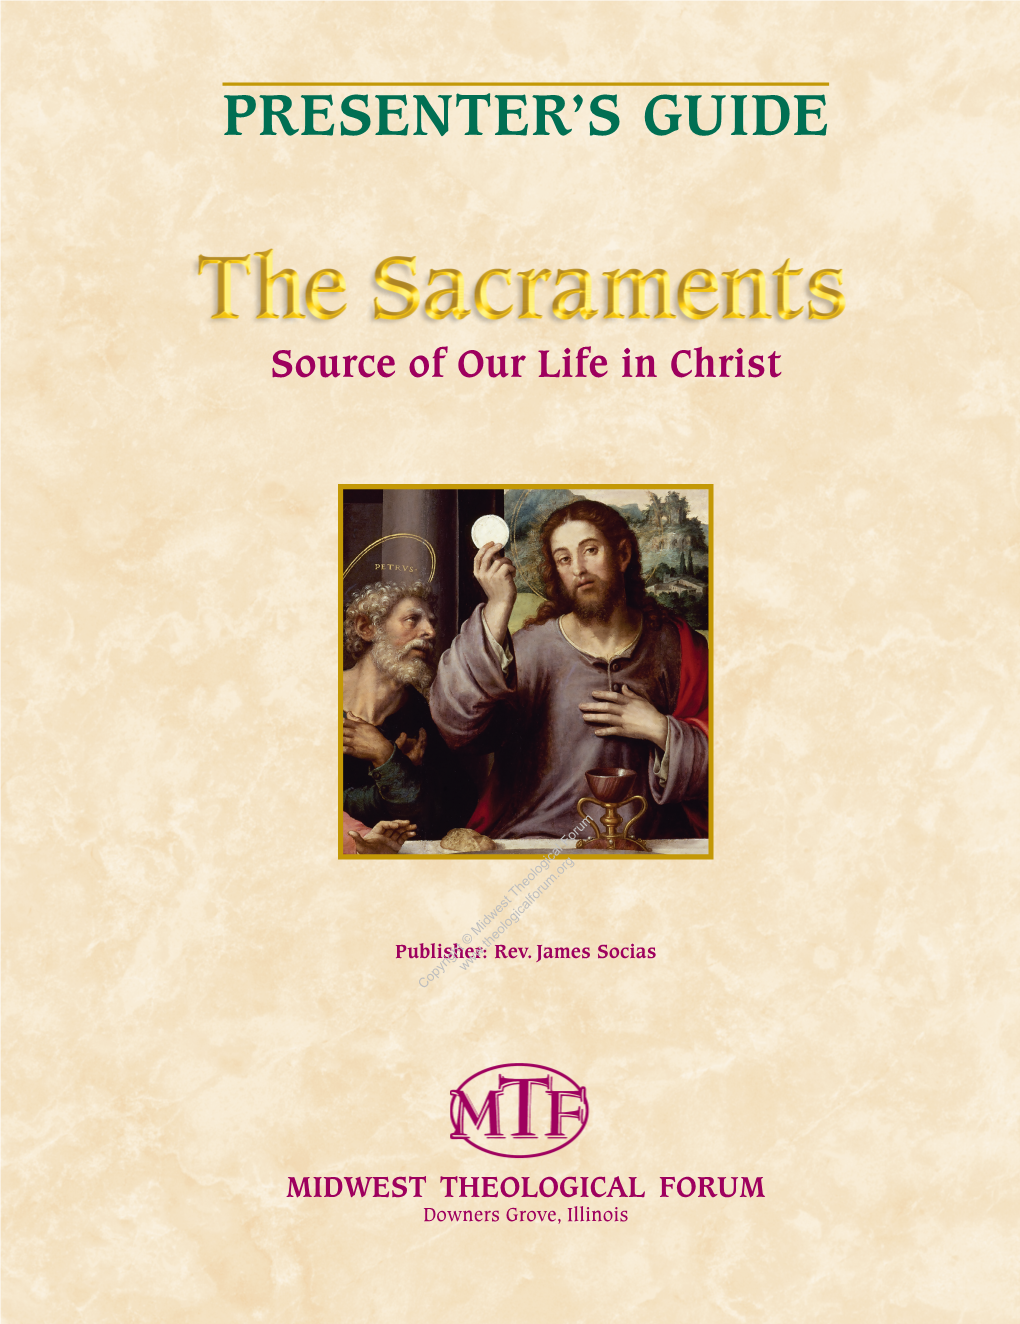 THE SACRAMENTS Source of Our Life in Christ